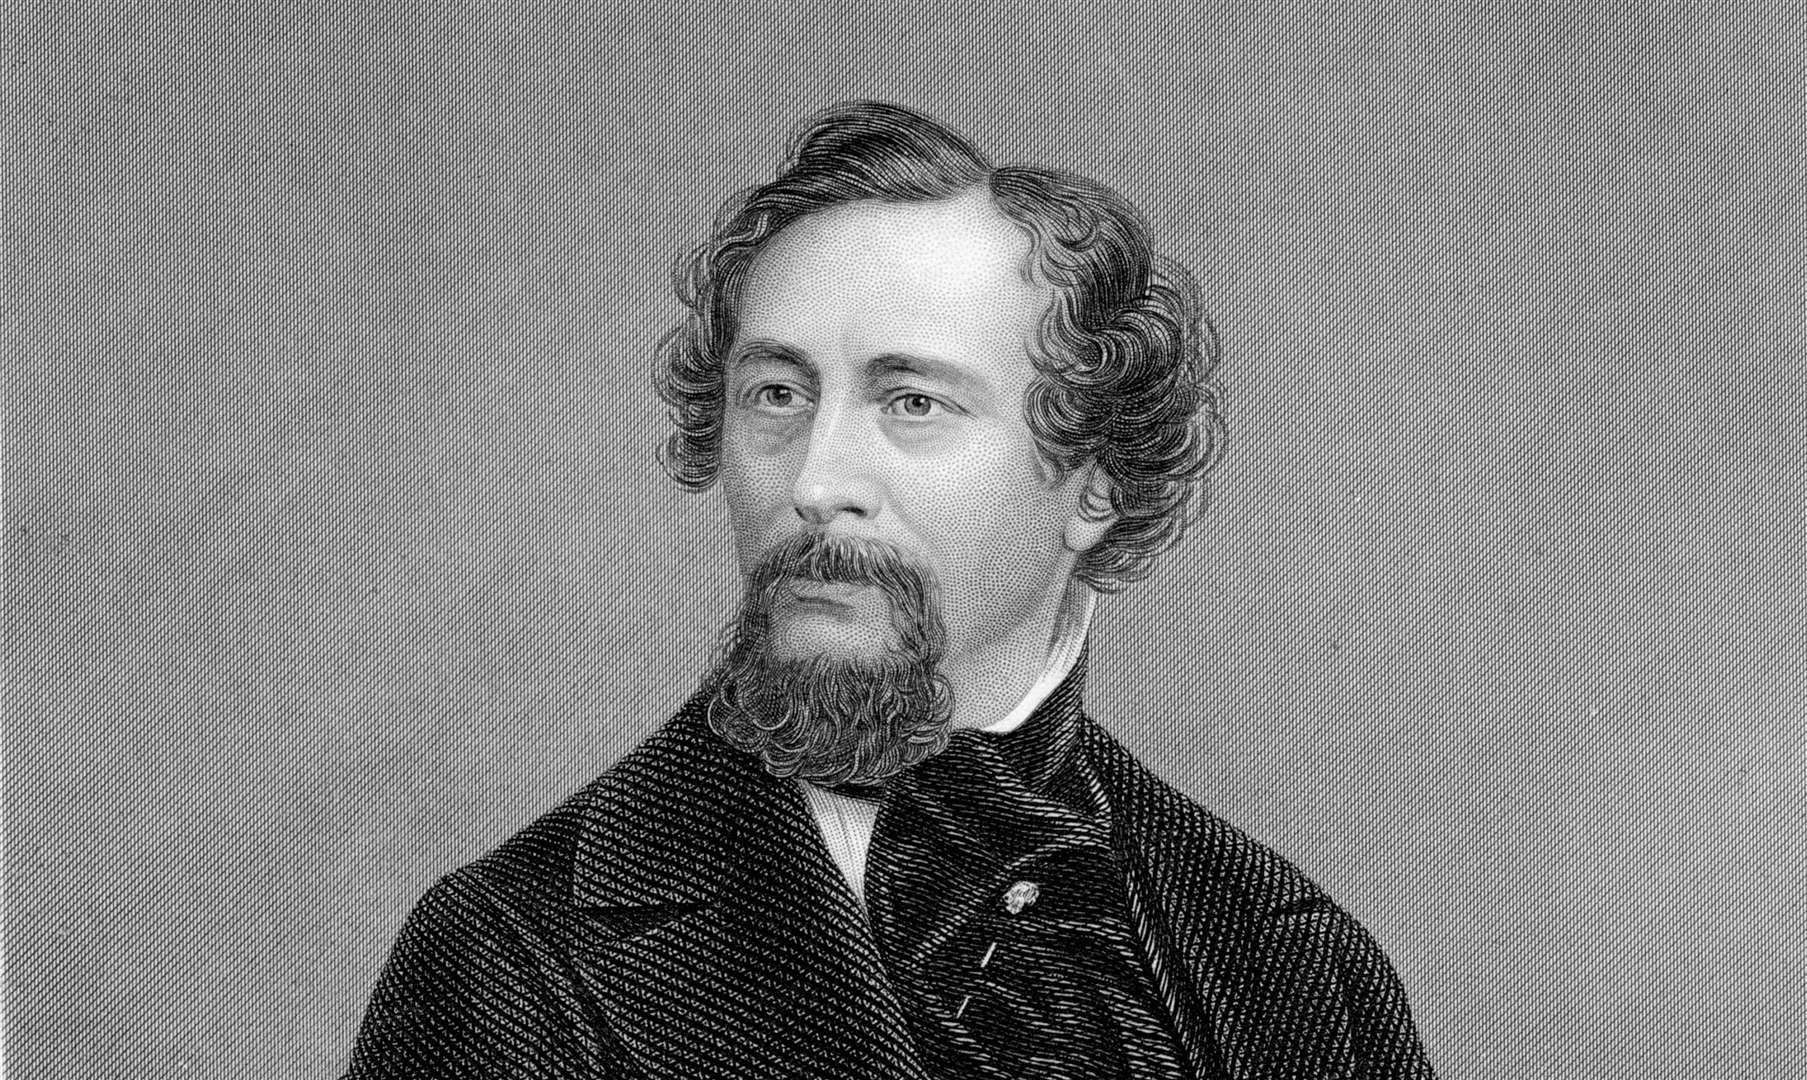 English writer Charles Dickens was a passenger on a train that crashed near Staplehurst, killing 10 people